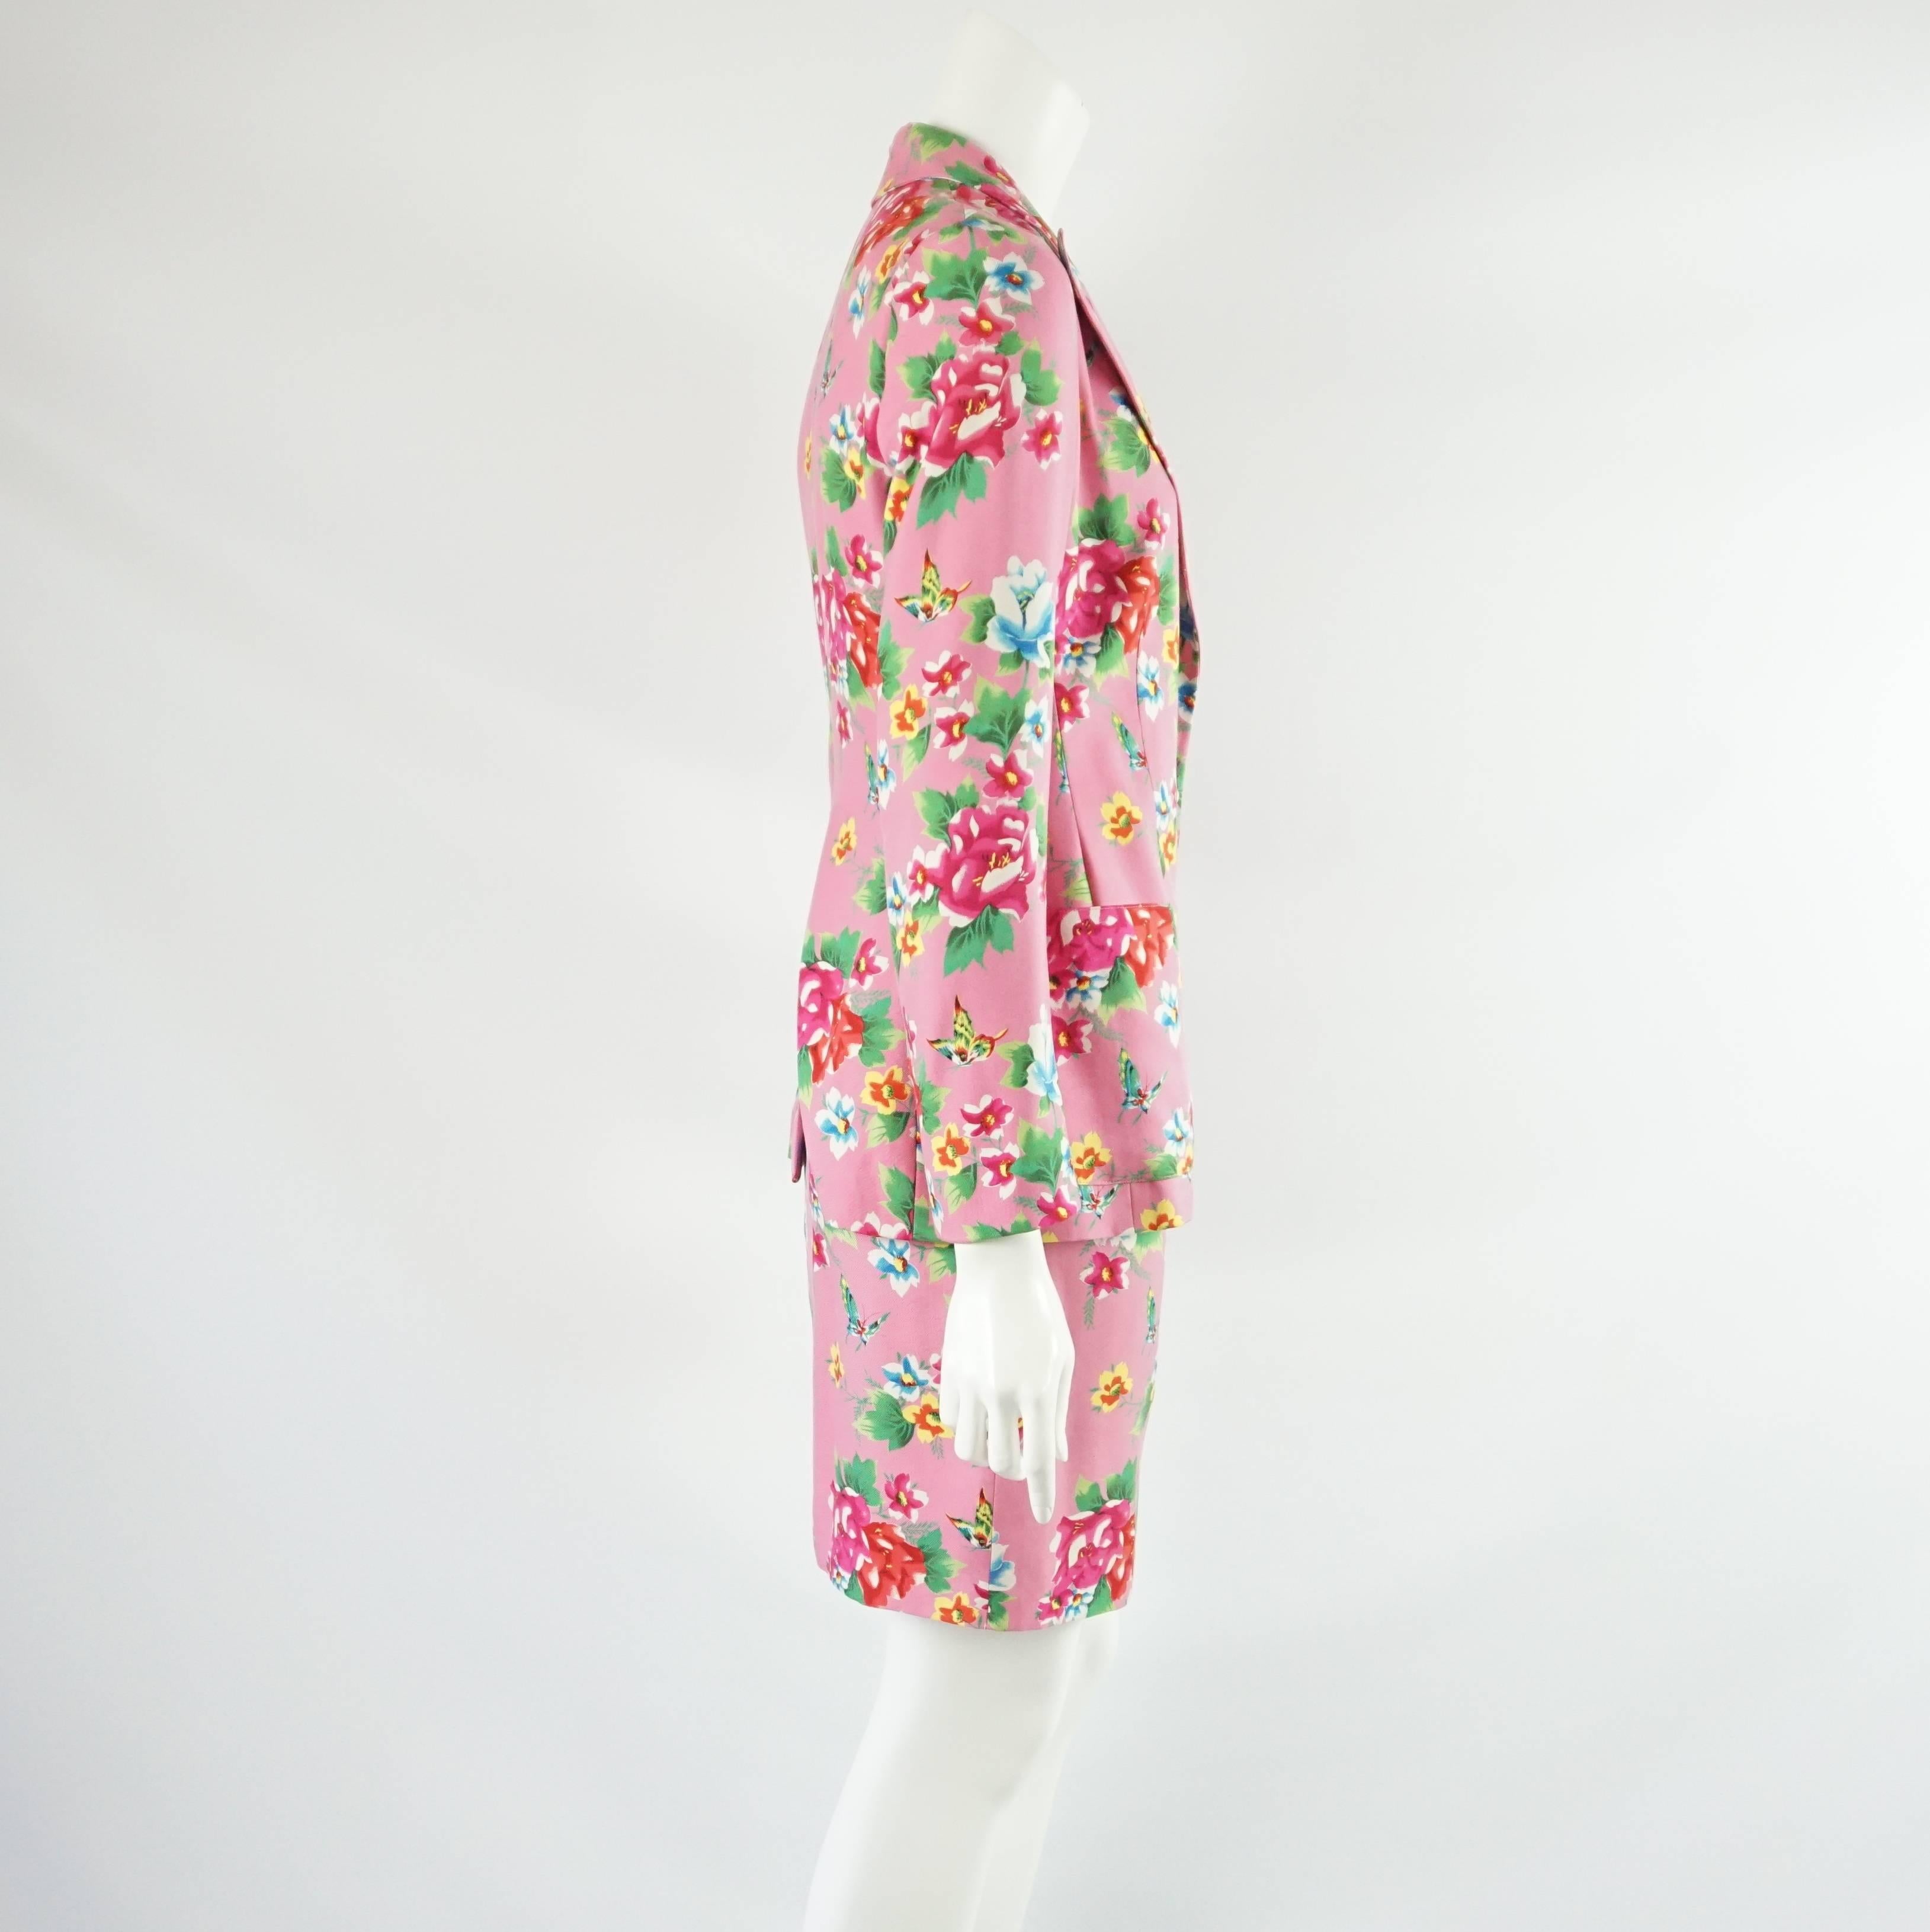 This Todd Oldham pink silk skirt suit has a multi-color floral print. The jacket is single breasted with 3 front pockets and 2 front buttons. The skirt has a straight cut and is high waisted. Both pieces are in very good vintage condition with a